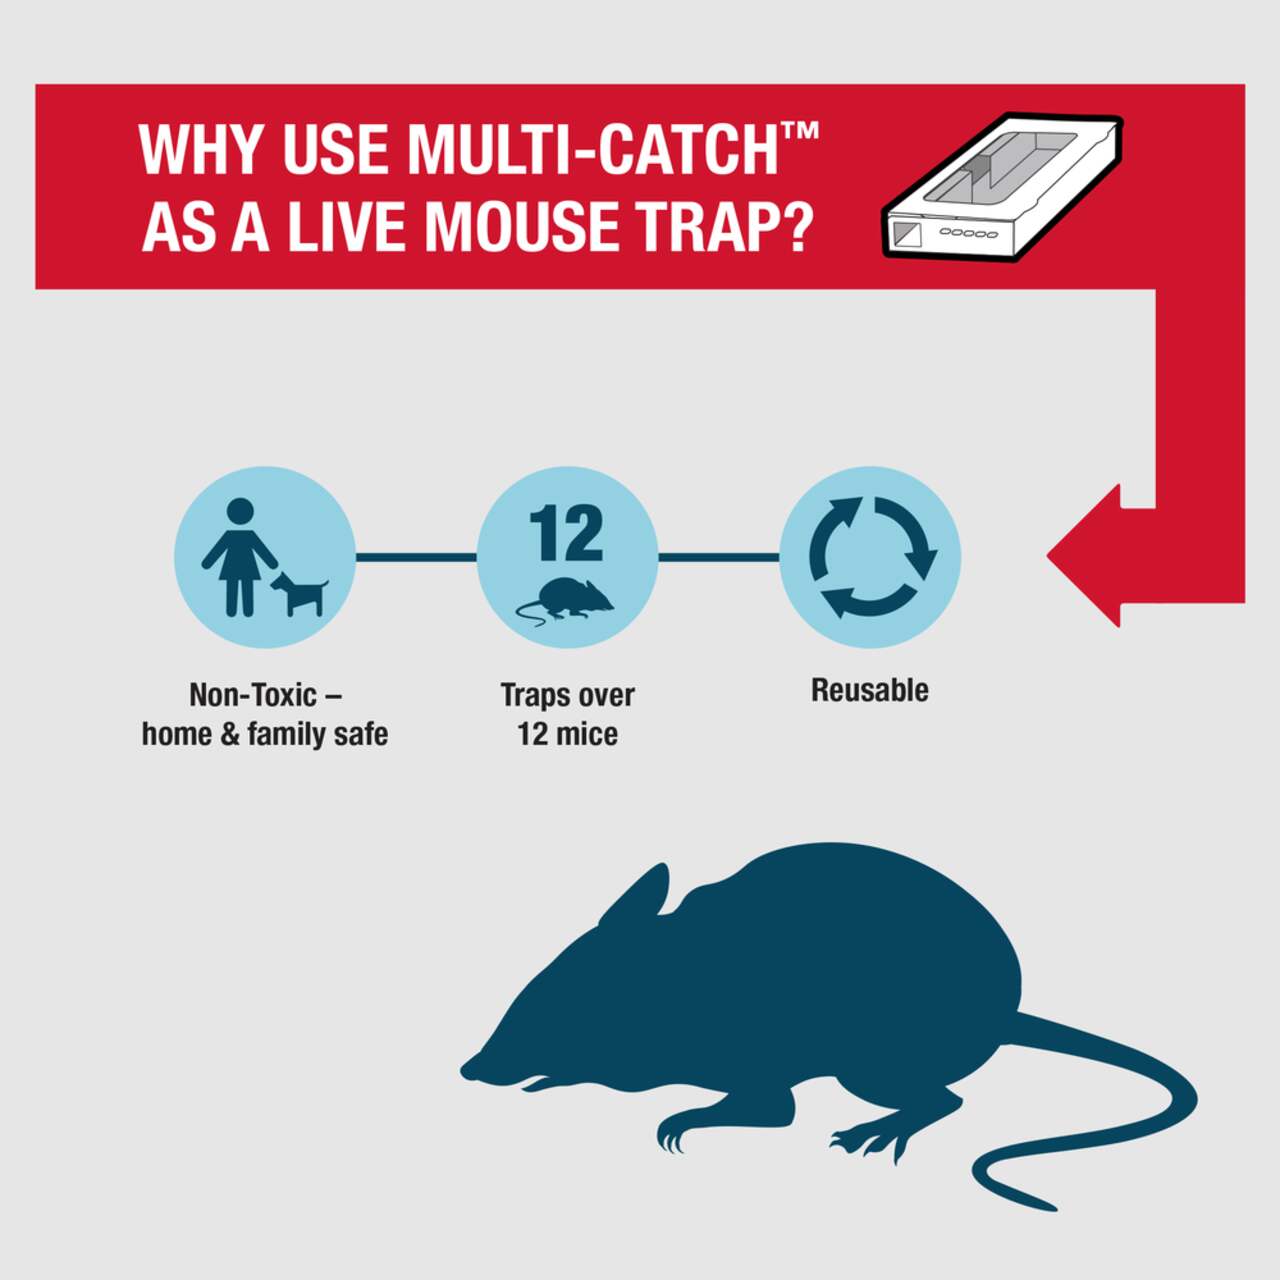 https://media-www.canadiantire.ca/product/seasonal-gardening/gardening/weed-insect-rodent-control/0593615/catchmaster-multiple-catch-metal-mouse-trap-d05d71b1-6f66-47ad-bab8-37a51562577c.png?imdensity=1&imwidth=1244&impolicy=mZoom